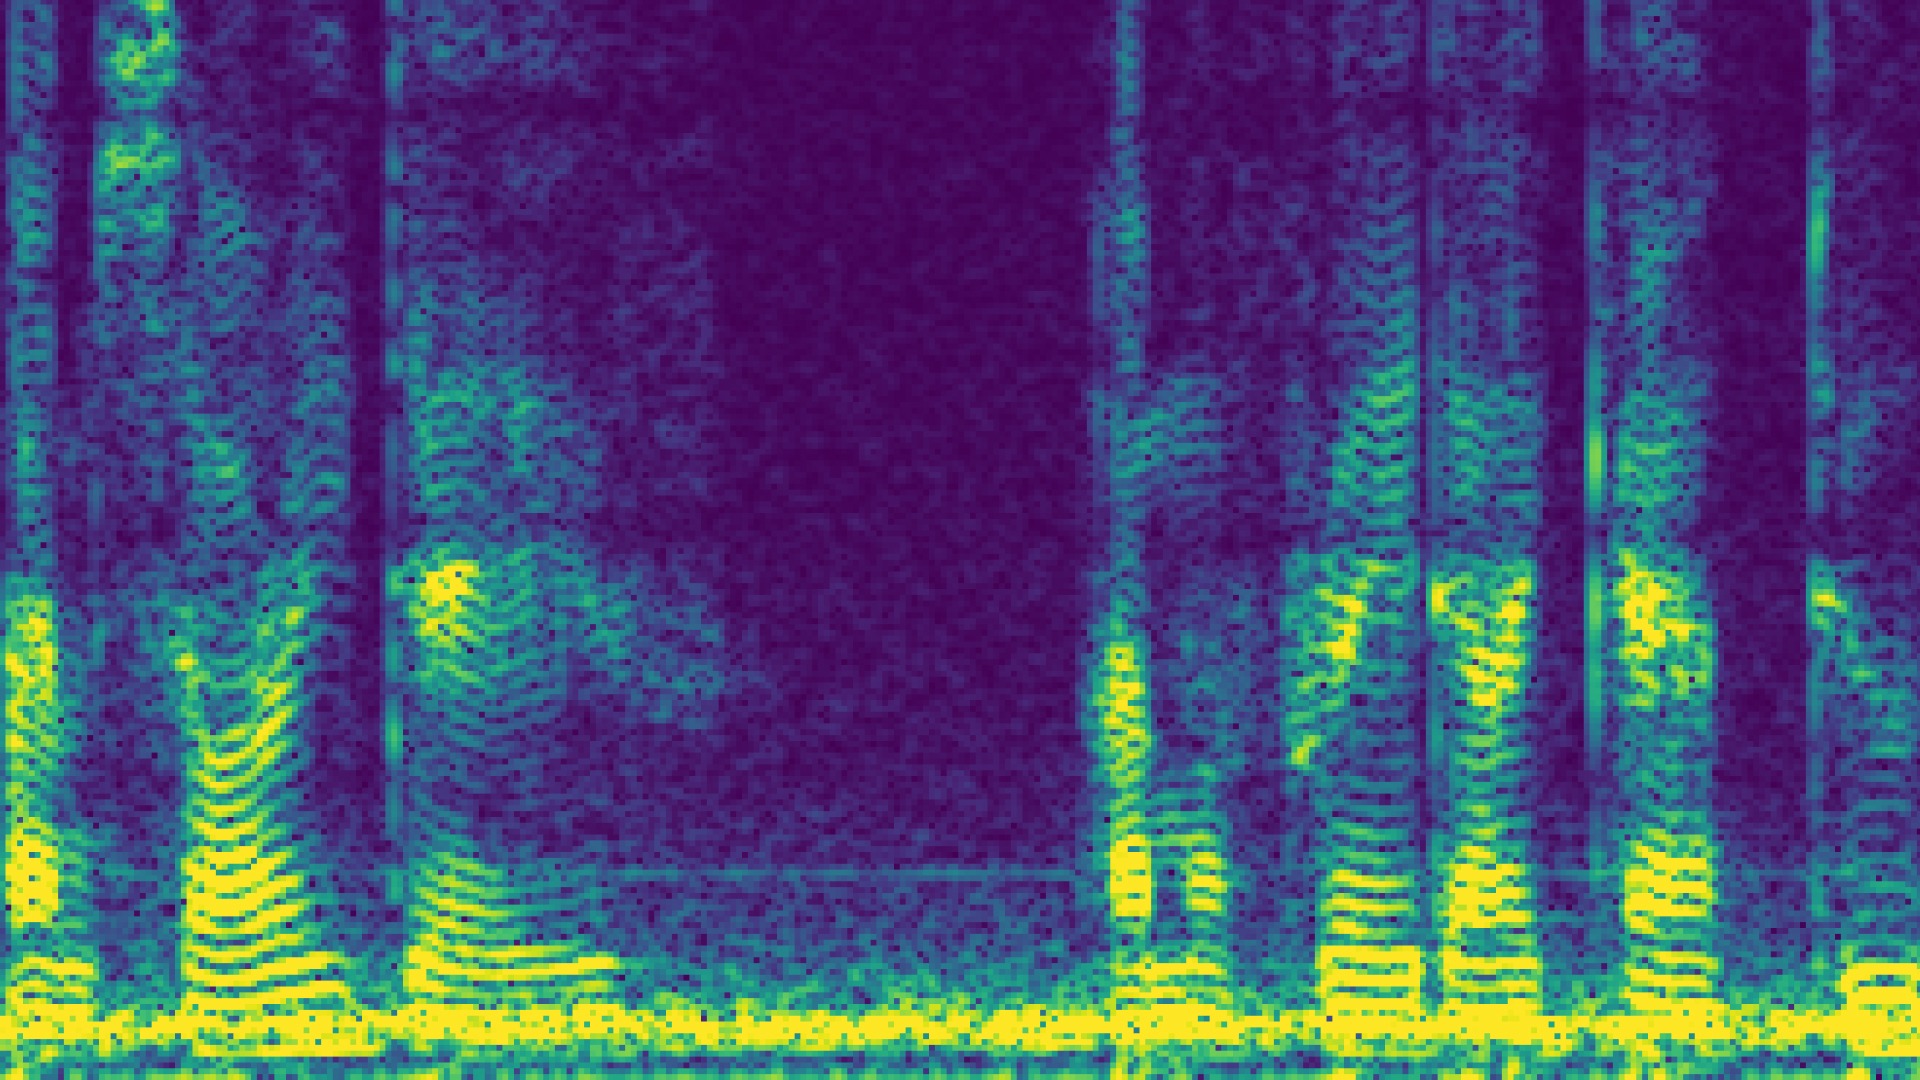 Read - <a href="https://blog.landr.com/spectrogram/" target="_blank" rel="noopener">What is a Spectrogram? The Producer’s Guide to Visual Audio</a>